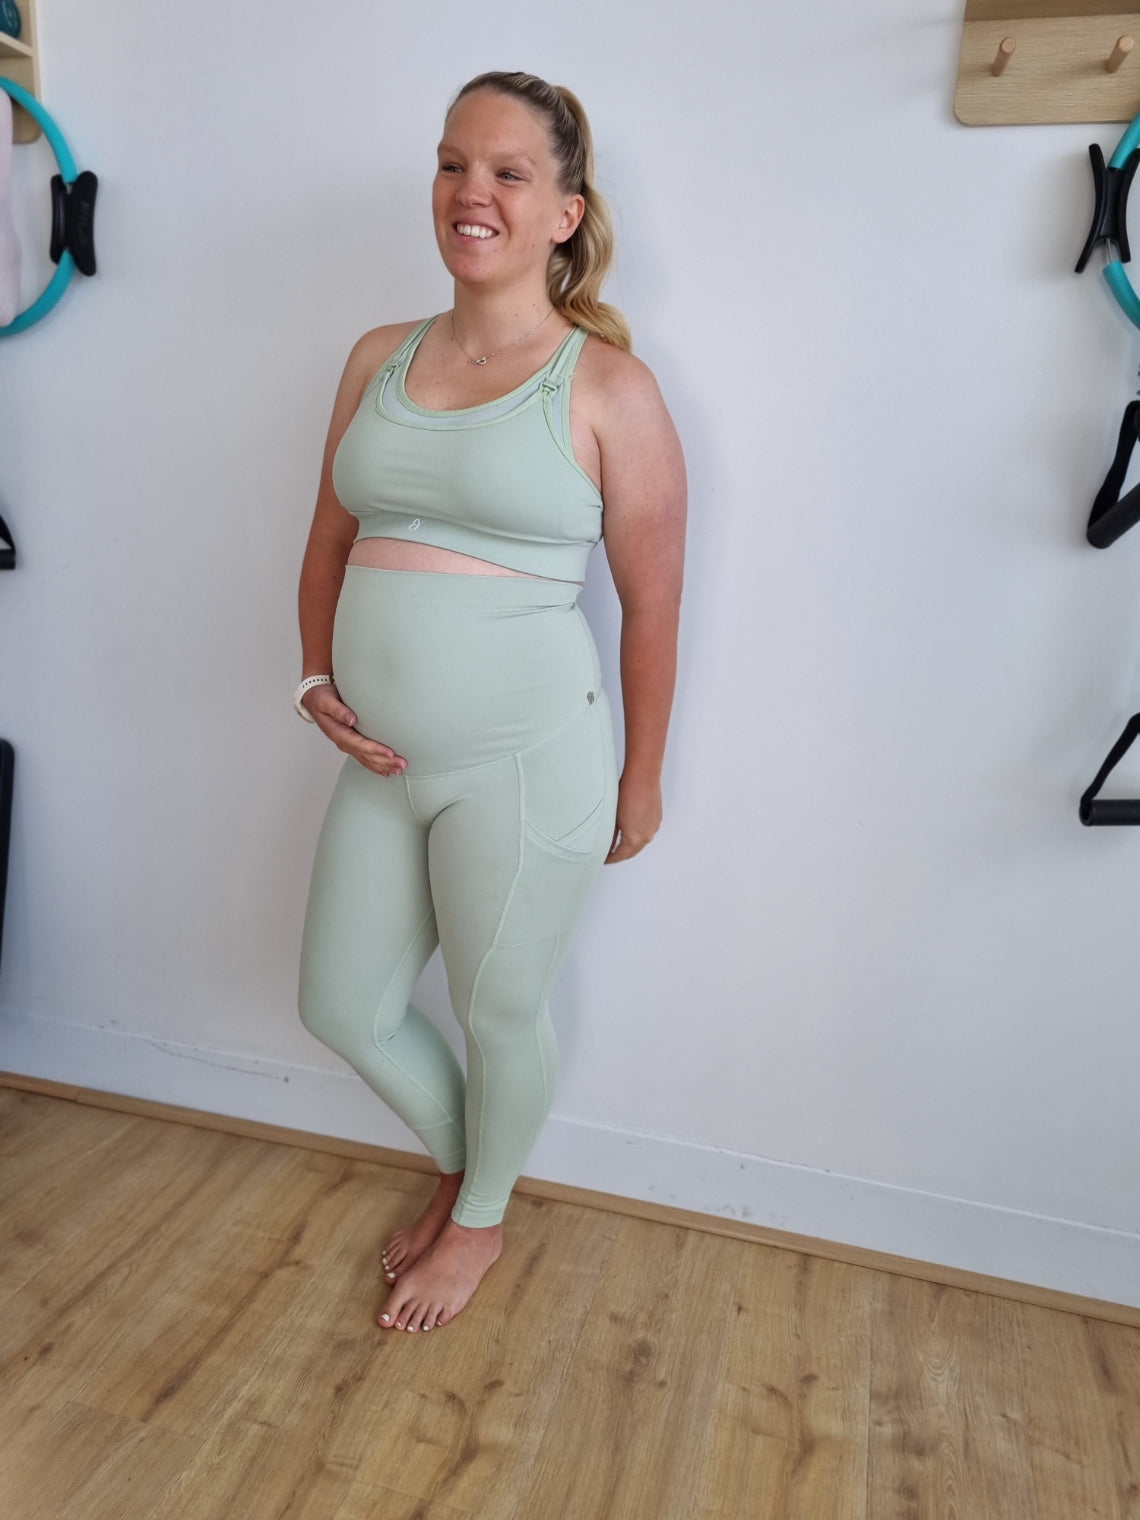 Maternity Activewear Support Leggings.